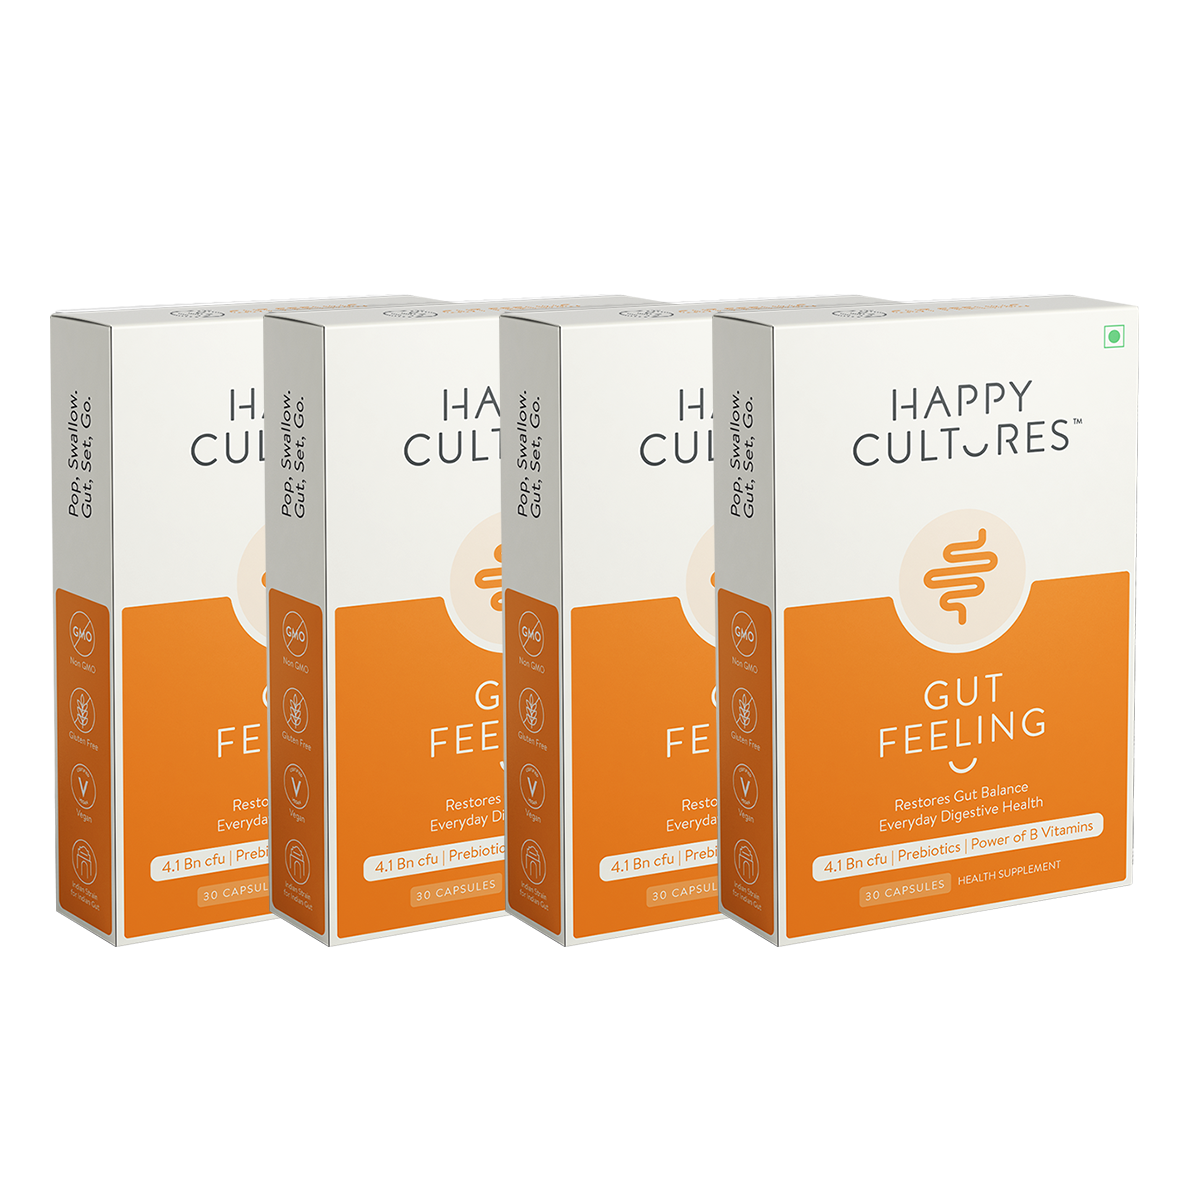 Gut Feeling - Unique Blend of Probiotics for Daily Digestive Health B-Vitamins Gut Health Supplement for Bloating, IBS, Digestion